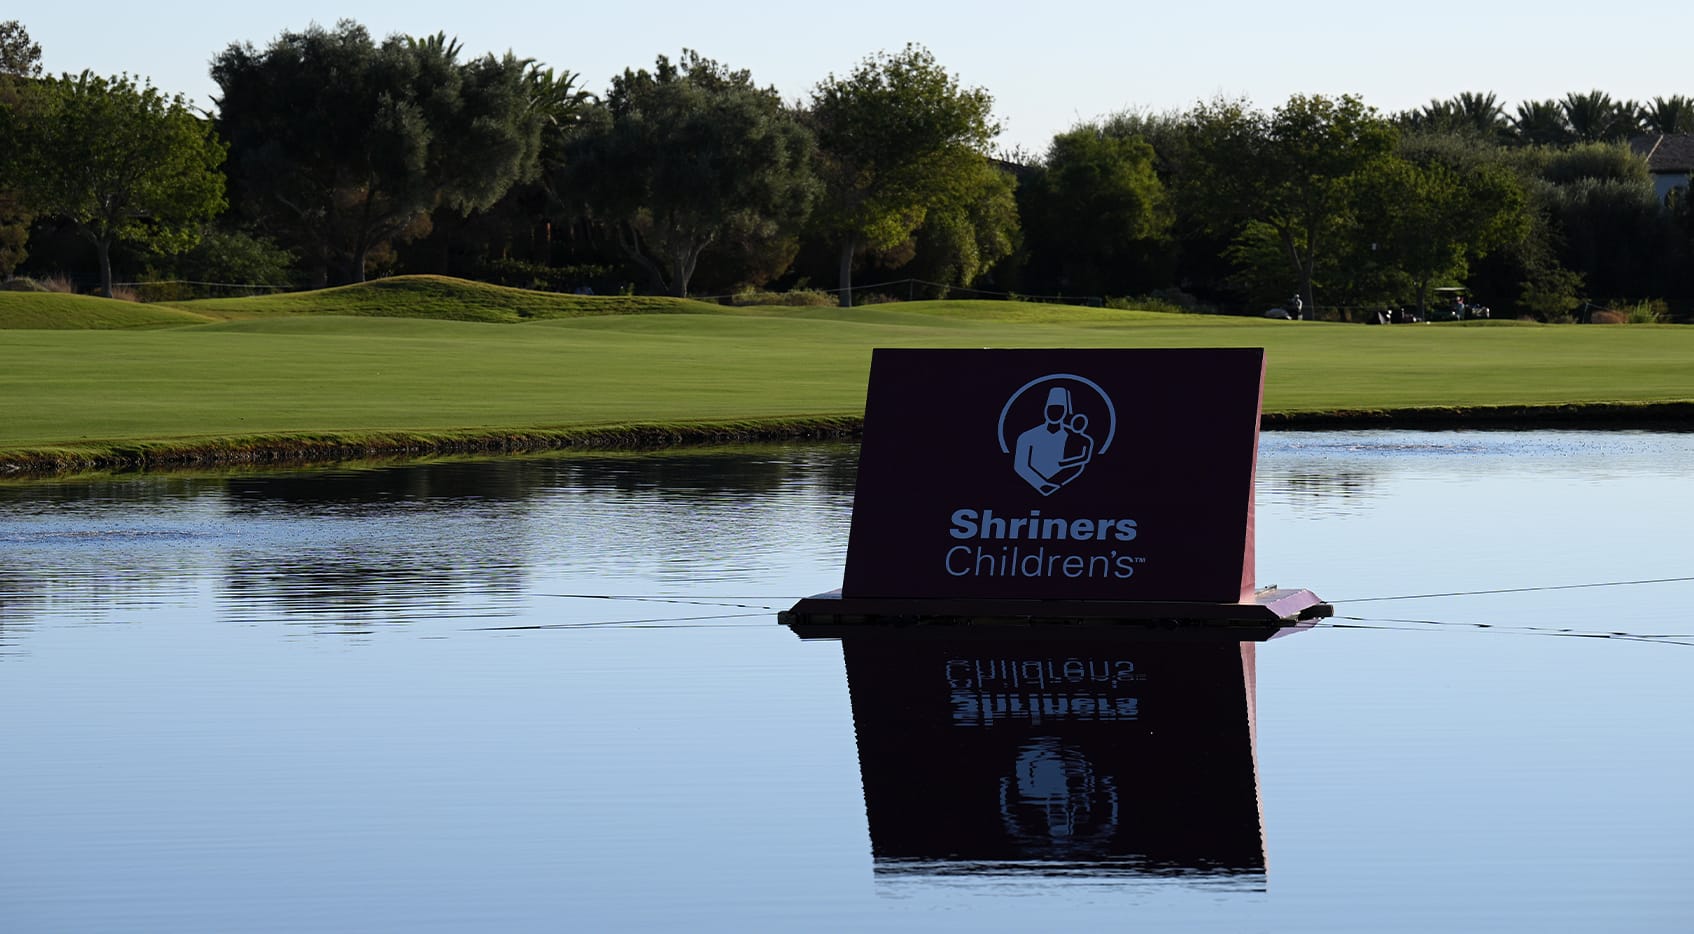 How to watch Shriners Children's Open, Round 4 Featured Groups, live